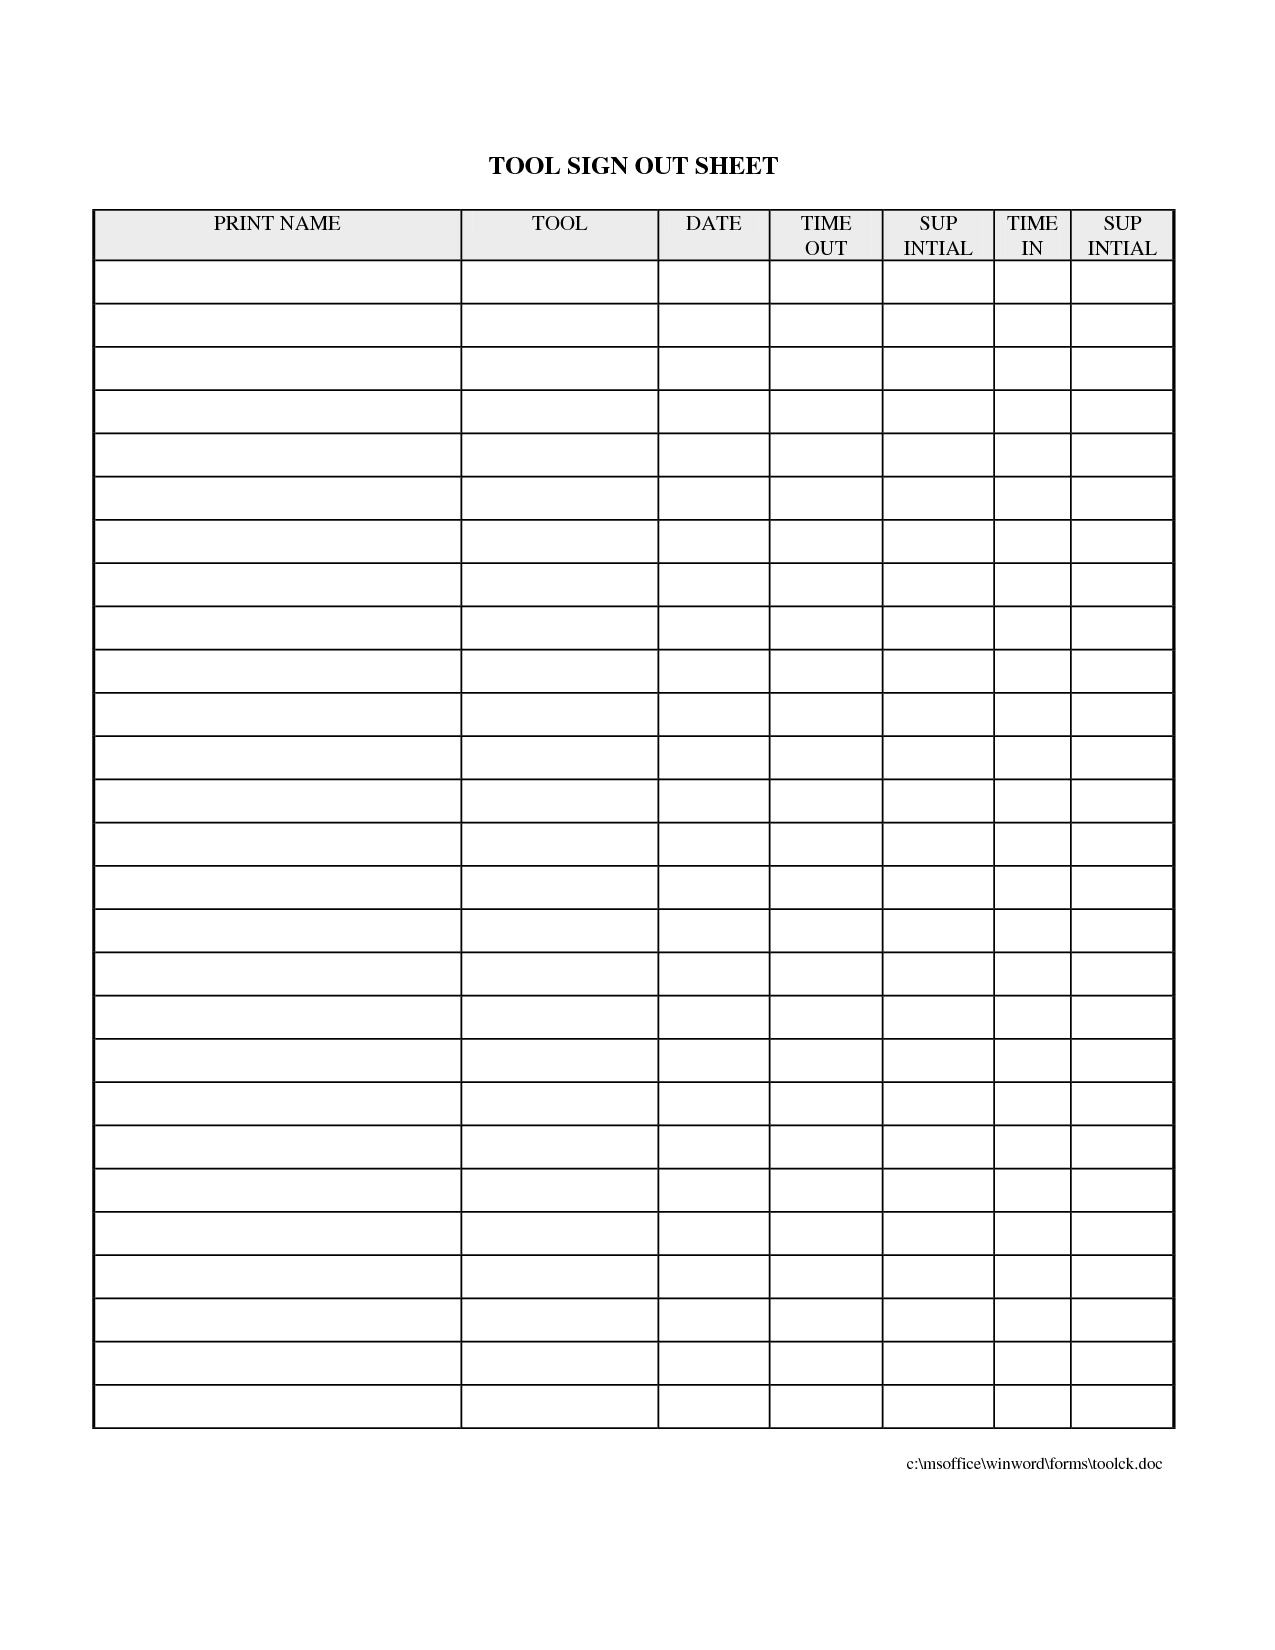 Army Tool Sign Out Sheet - Kaza.psstech.co - Free Printable Sign In And Out Sheets